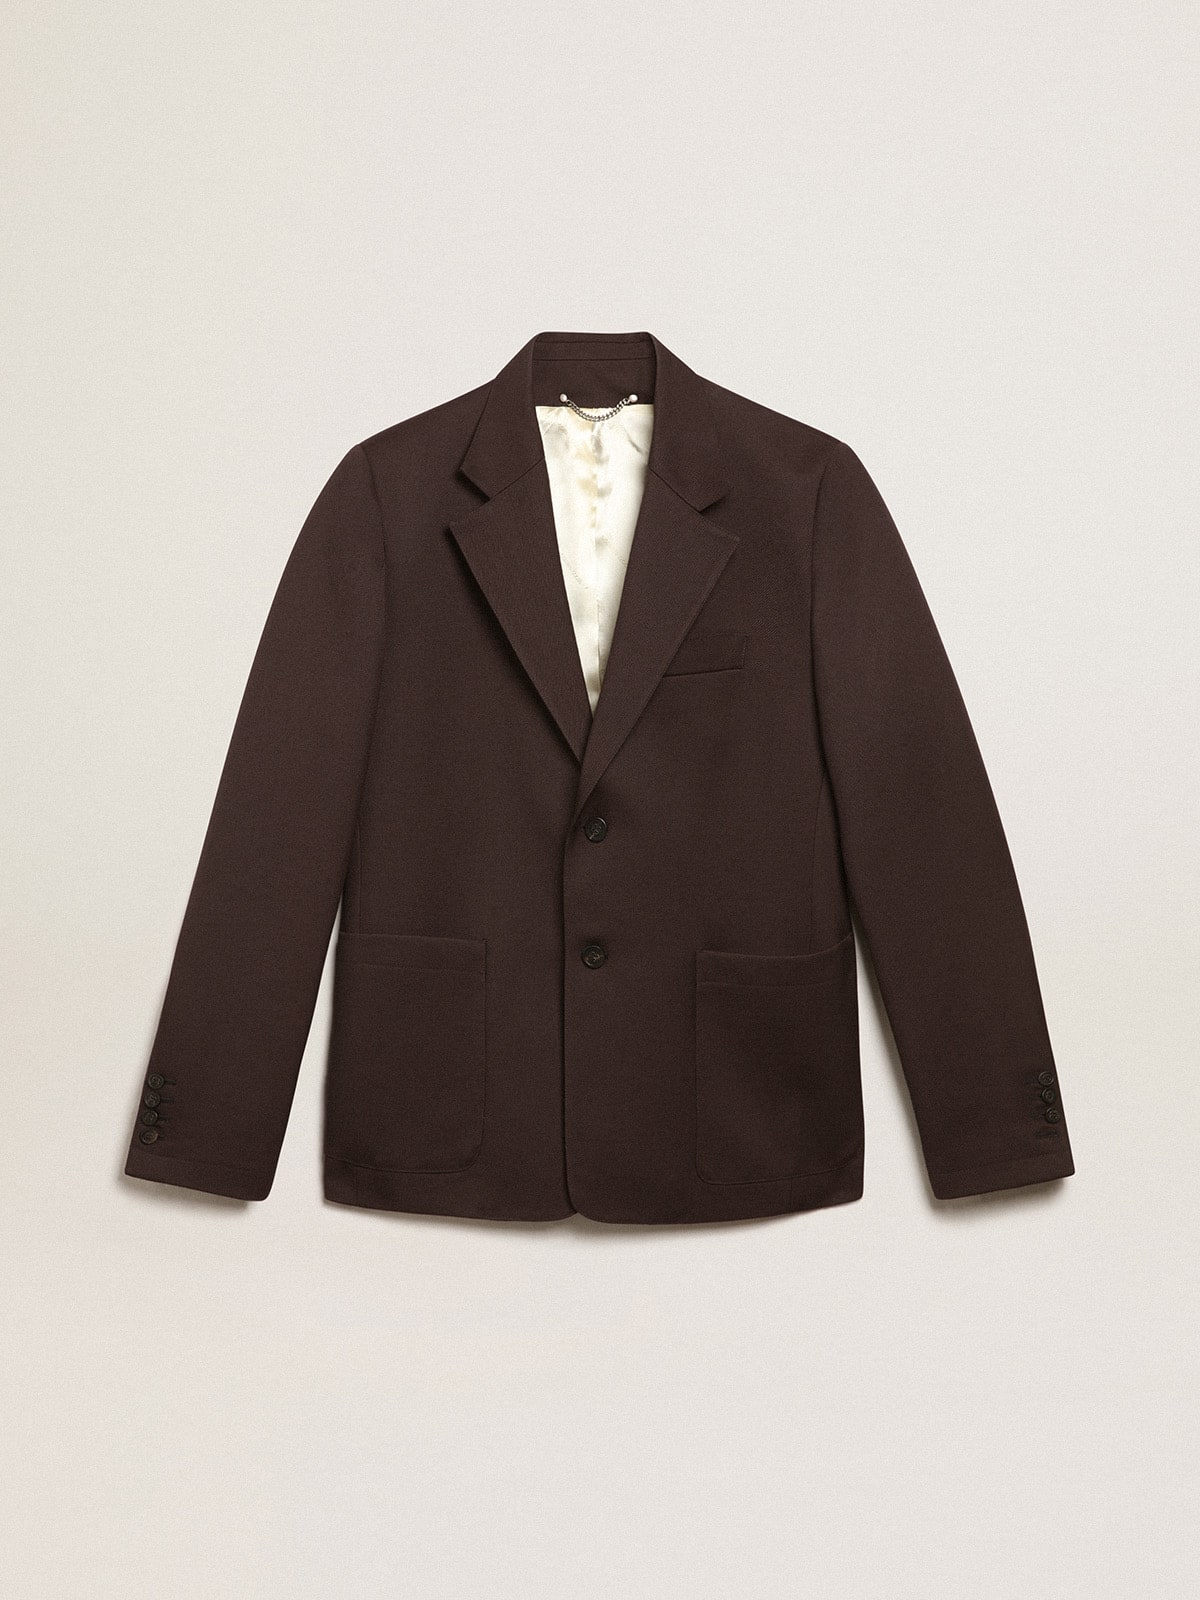 Journey Collection single-breasted blazer in licorice-colored wool gabardine with horn buttons